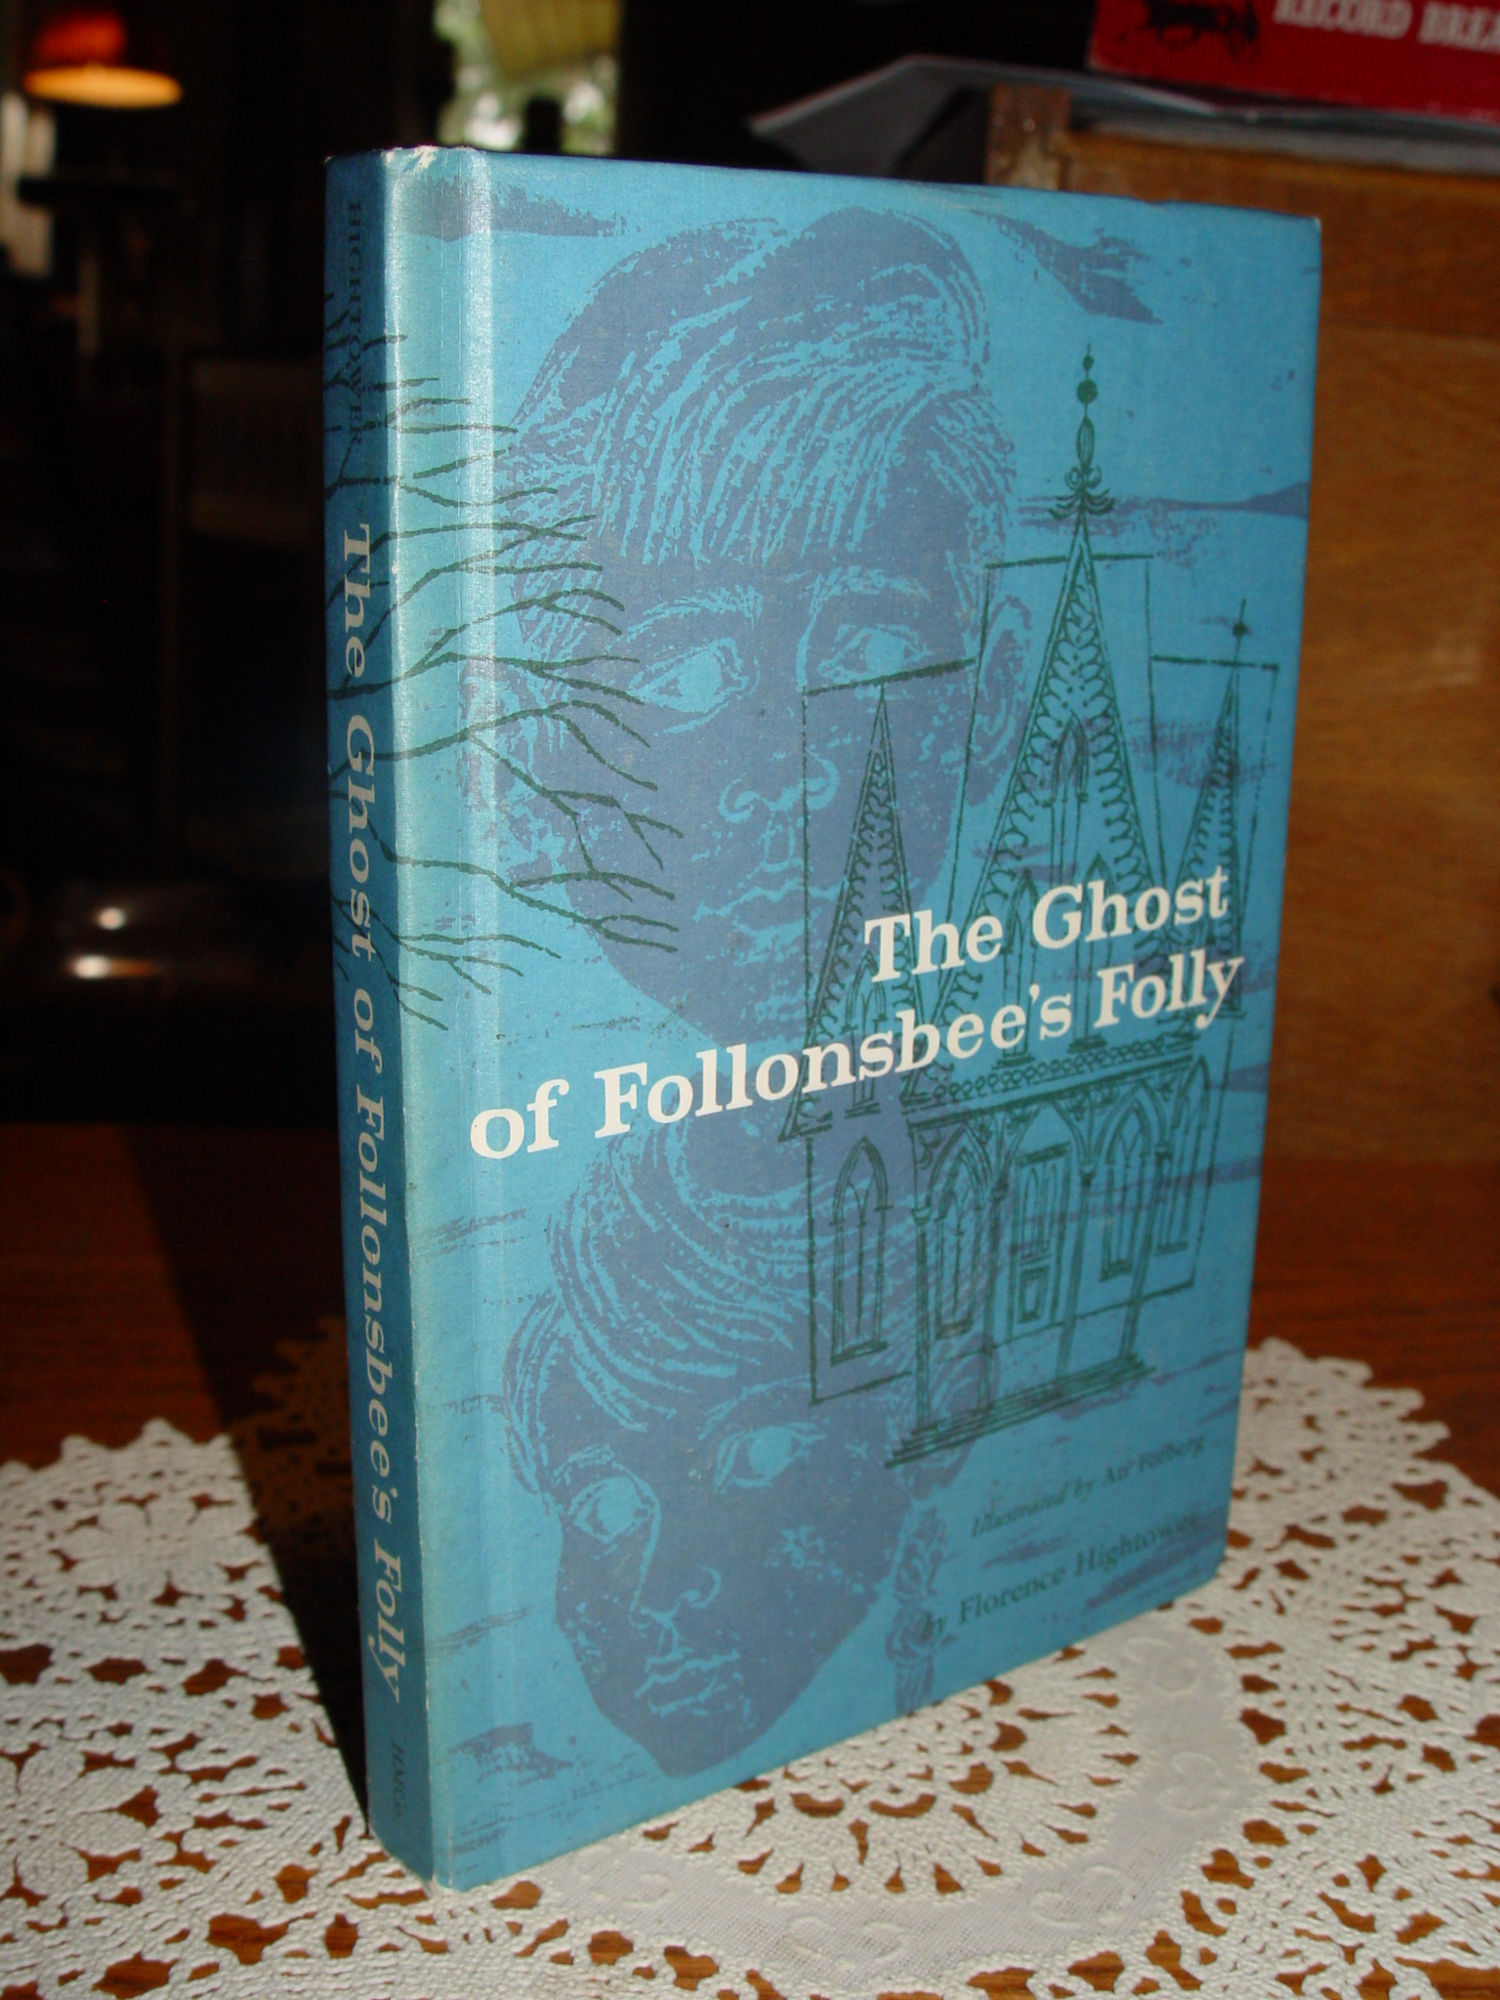 The Ghost of Follonsbee's Folly 1958 by
                        Florence Hightower